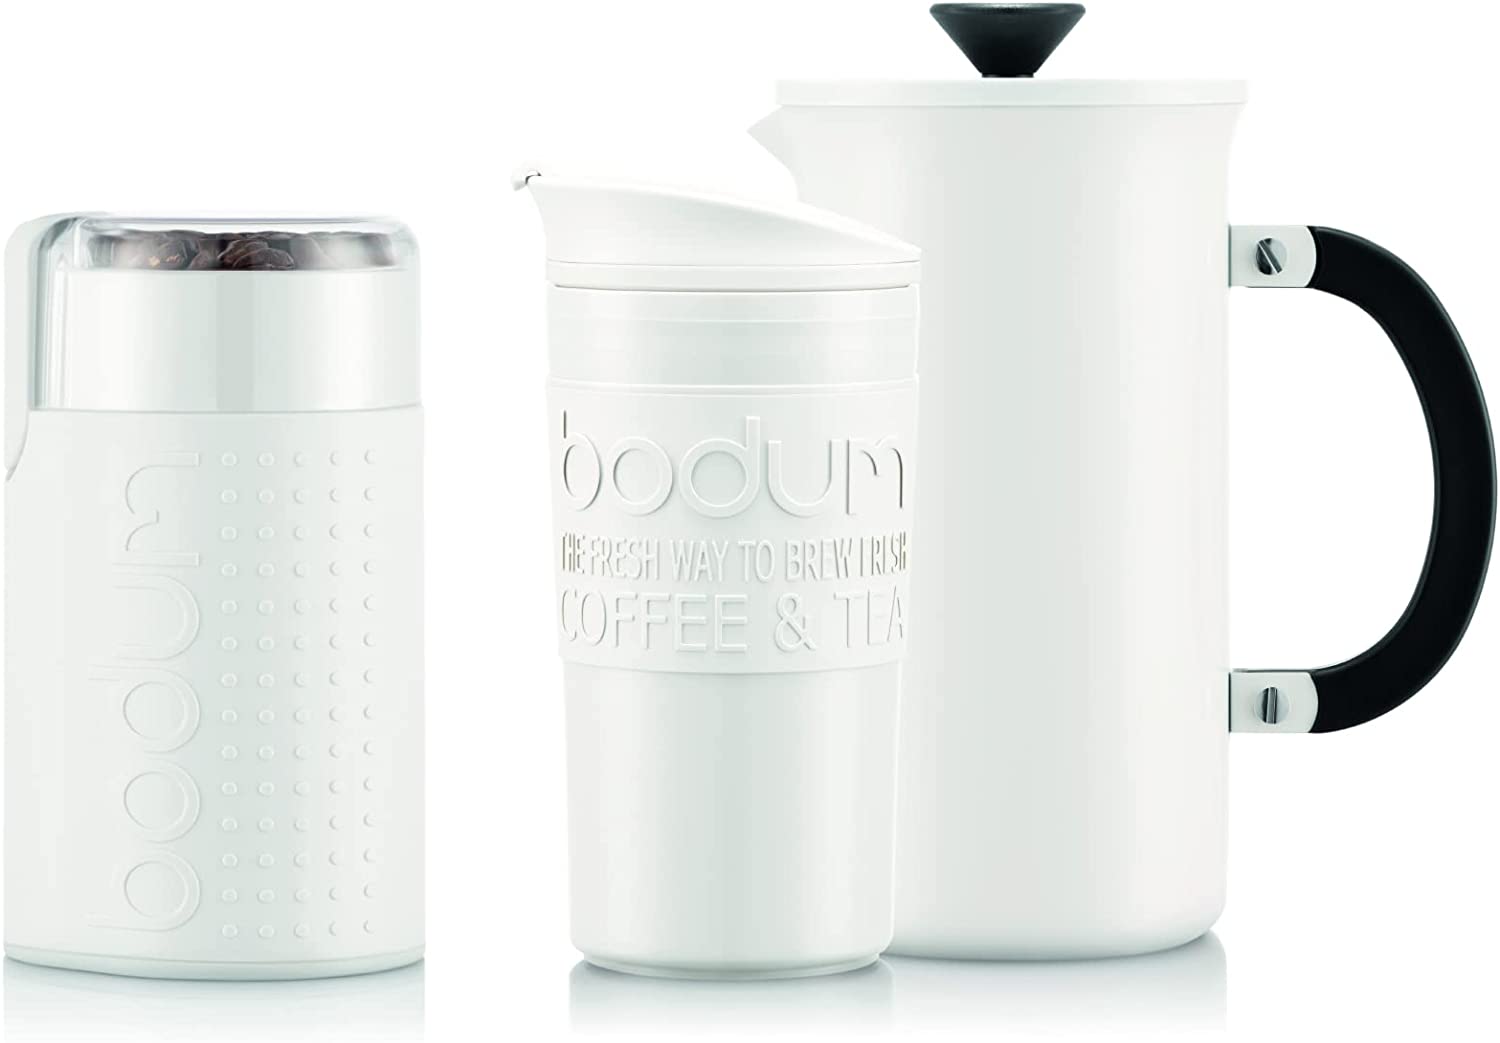 Bodum TRIBUTE SET K11352-913EURO Cafetiere Coffee Maker 8 Cups / 1.0 L Travel Mug and Coffee Grinder